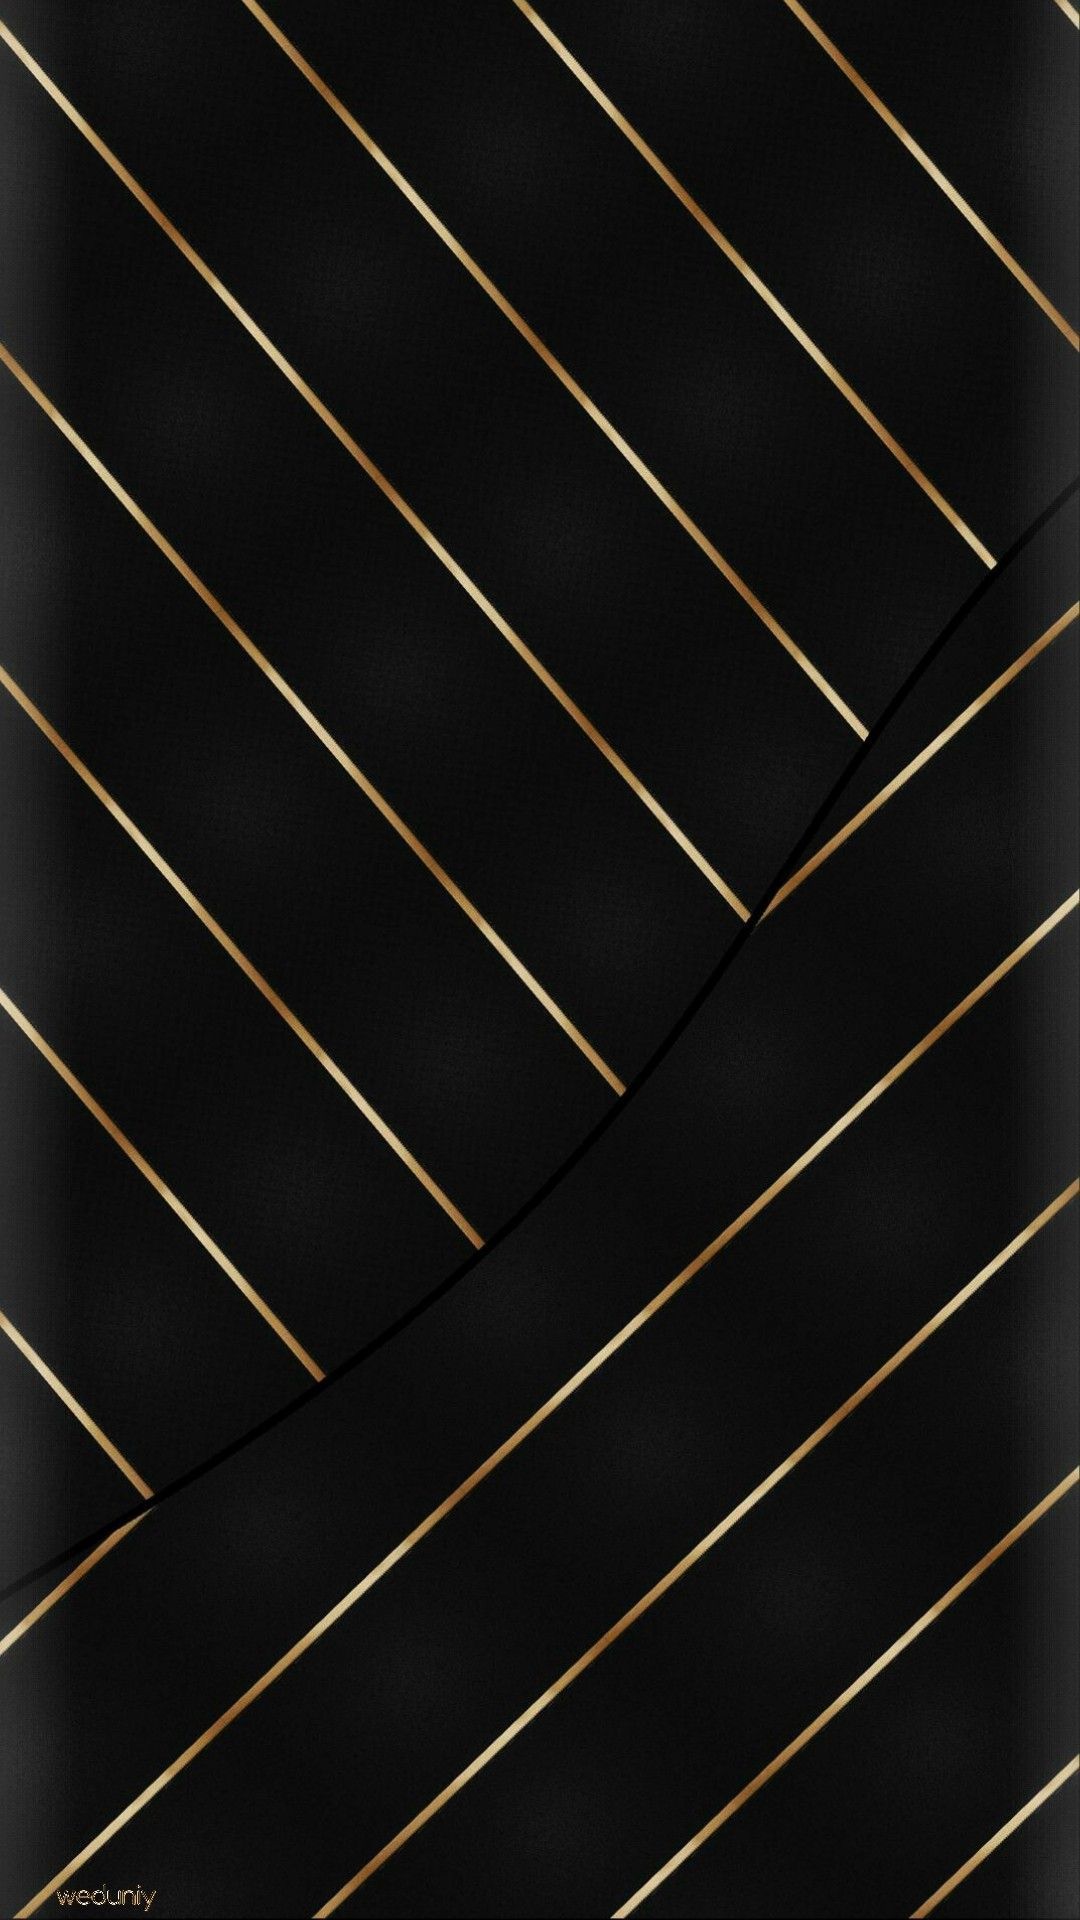 Abstract Geometric Gray and Golden Looking Luxury Wallpaper